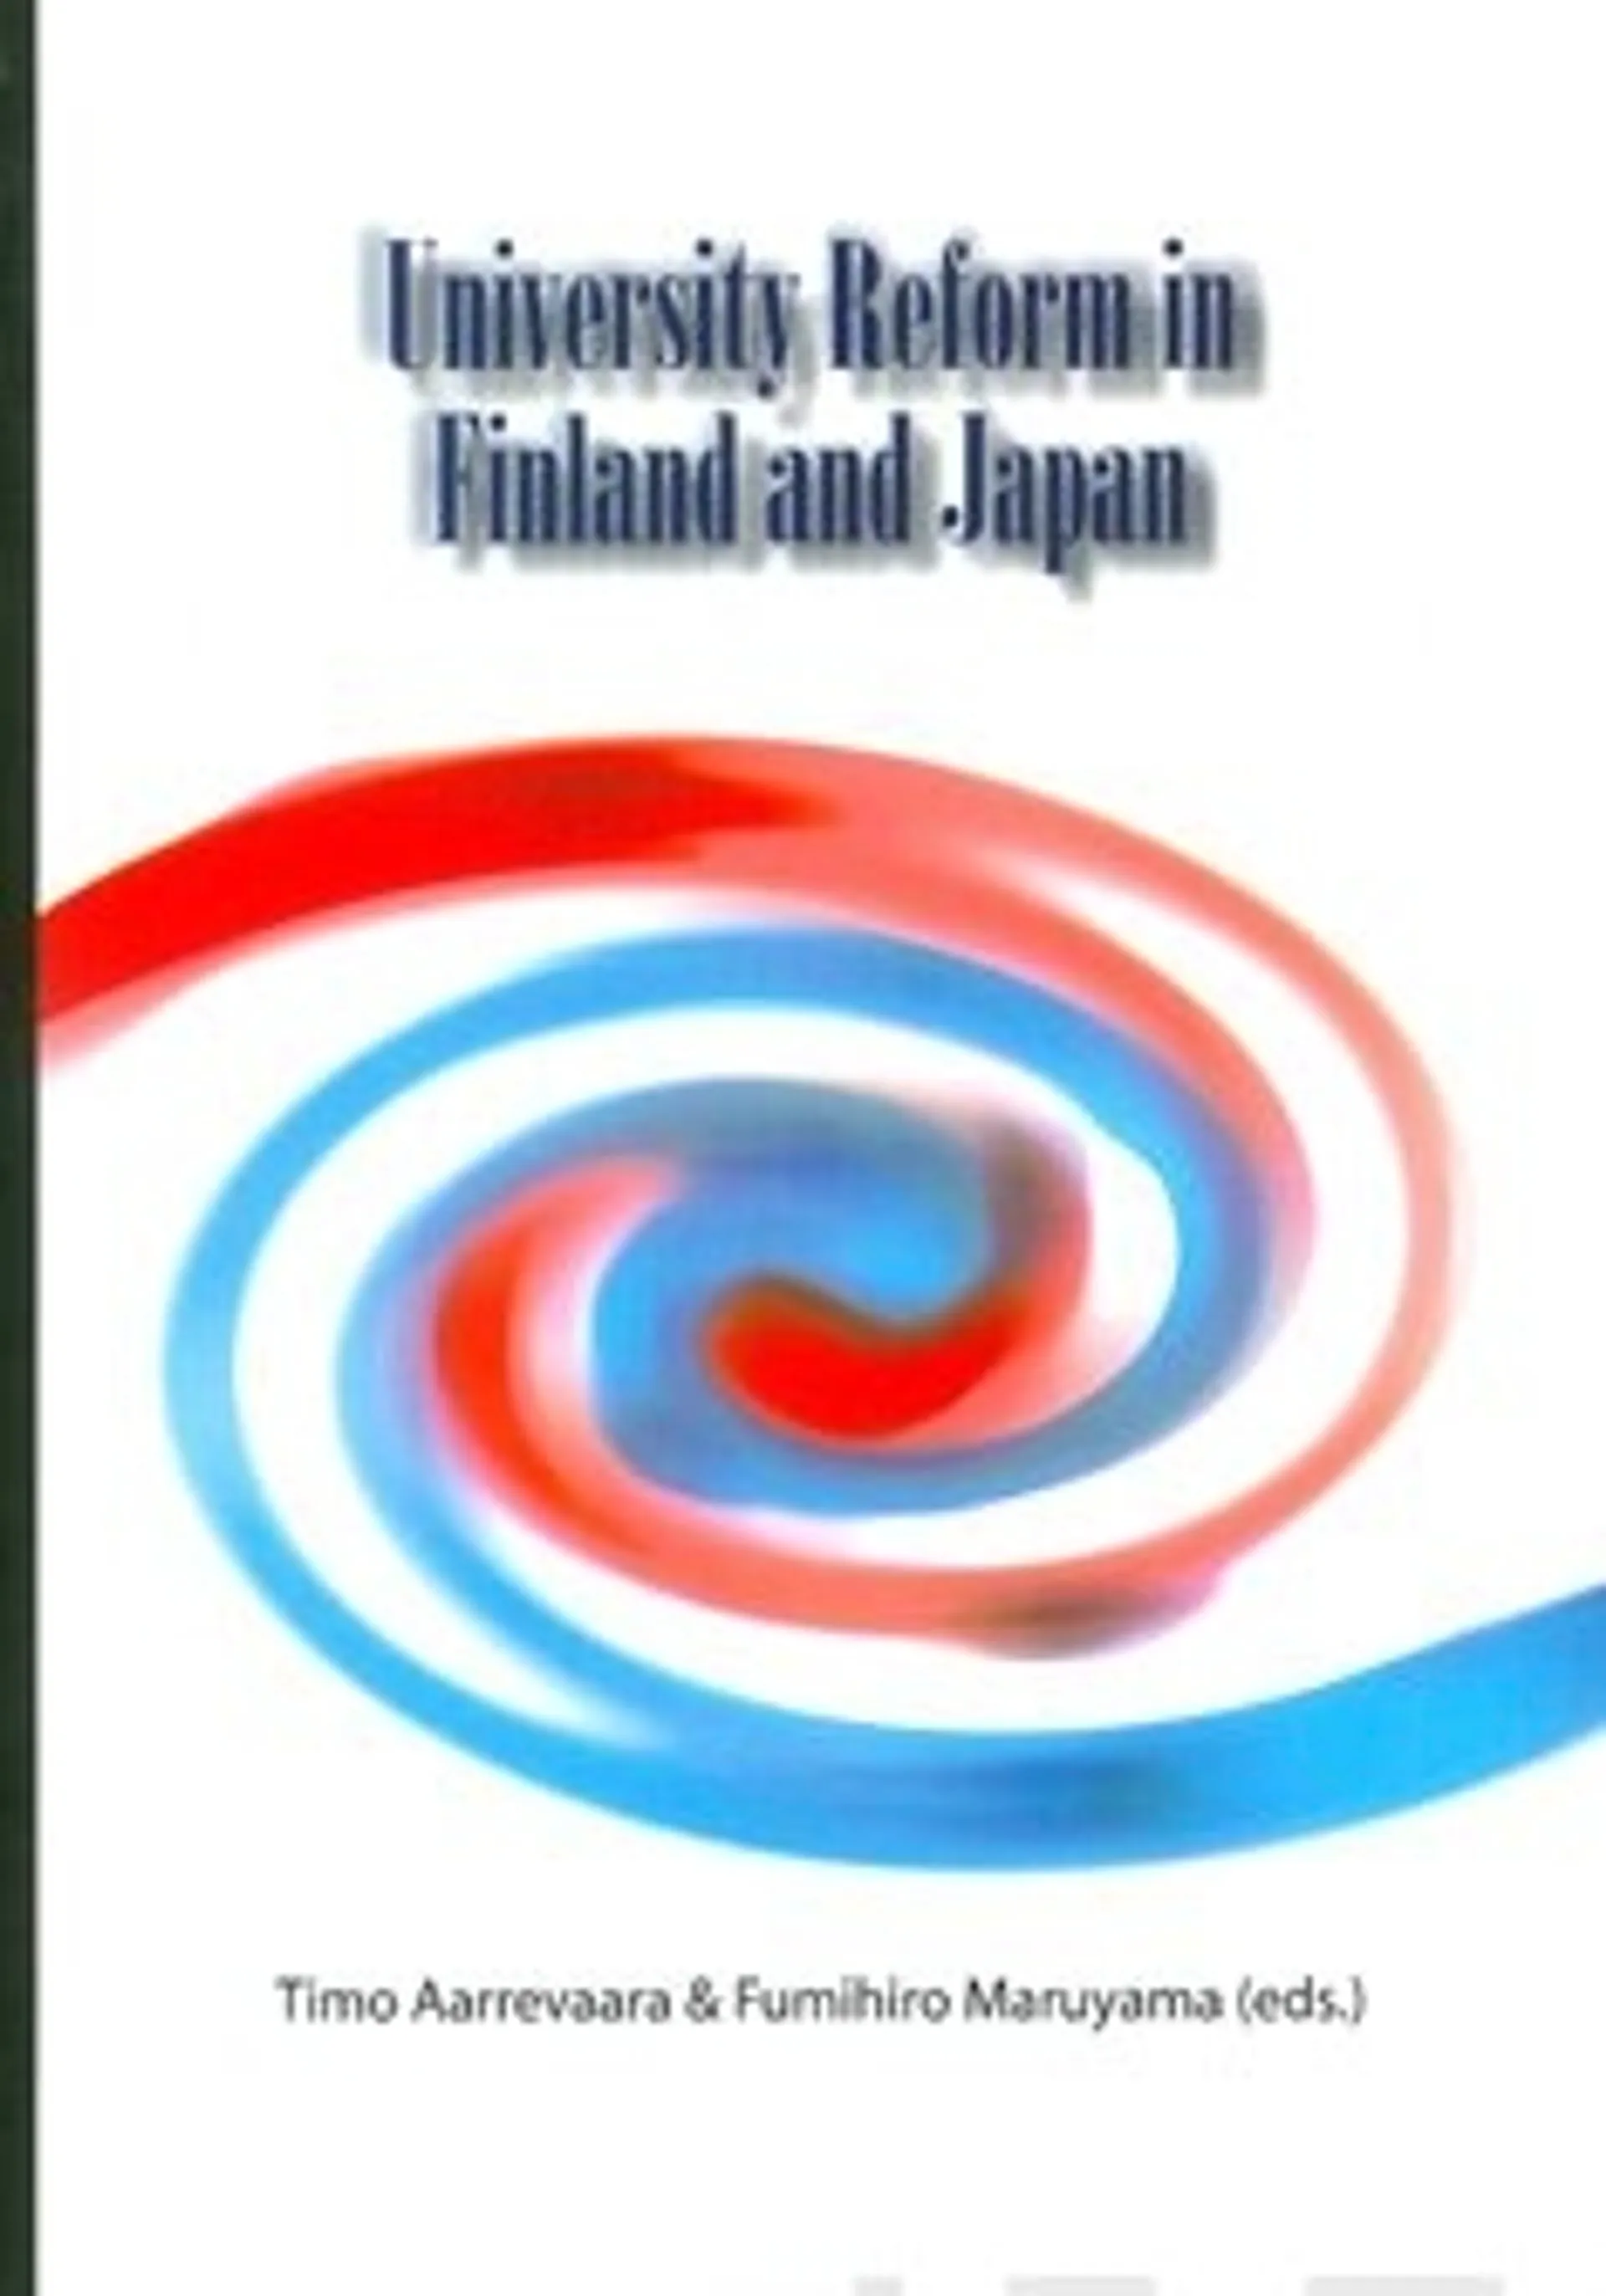 University reform in Finland and Japan